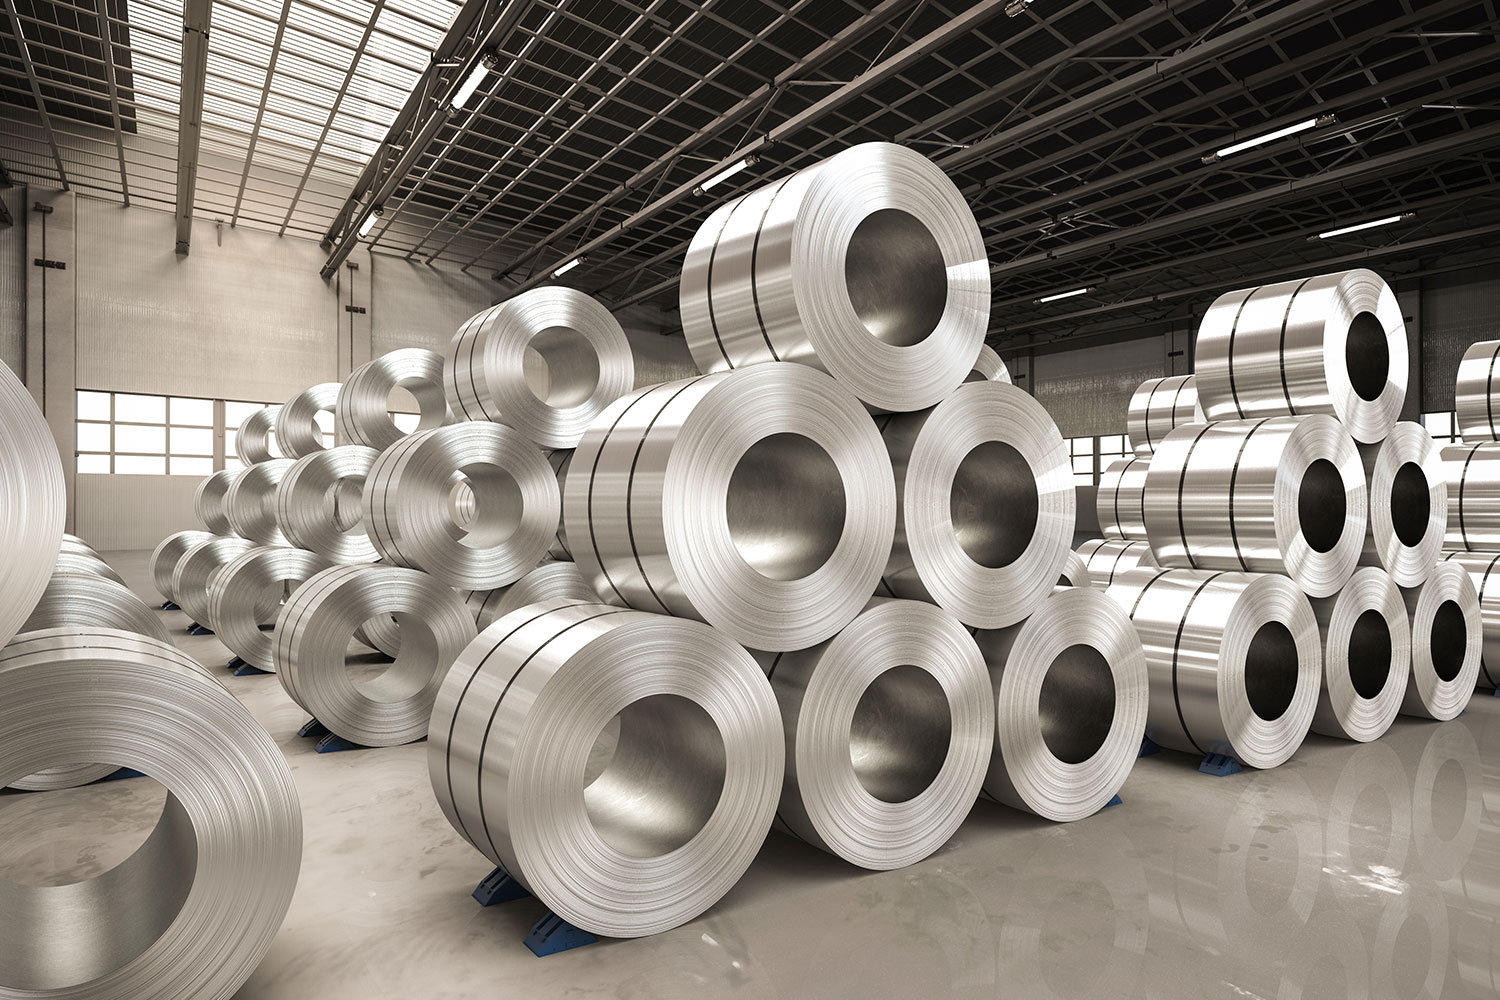 Image of steel rolls to indicate inclusion free steel production